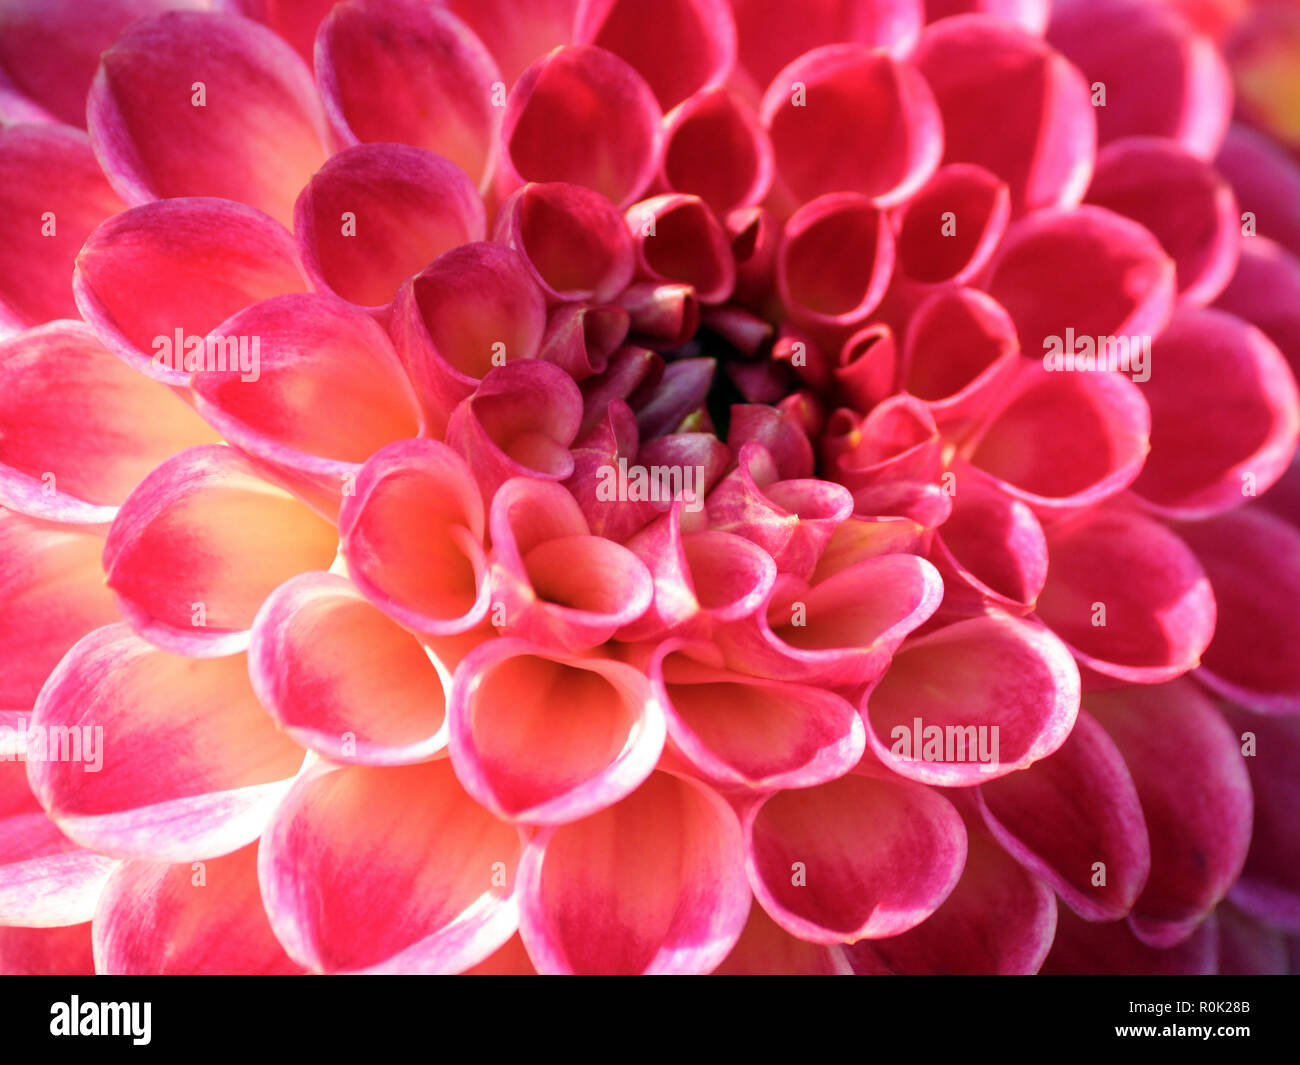 dahlia wisla variety, a closeup bright pink flower lit by sunlight, lots of tubular petals, illuminated by sunlight, part of a single flower Stock Photo